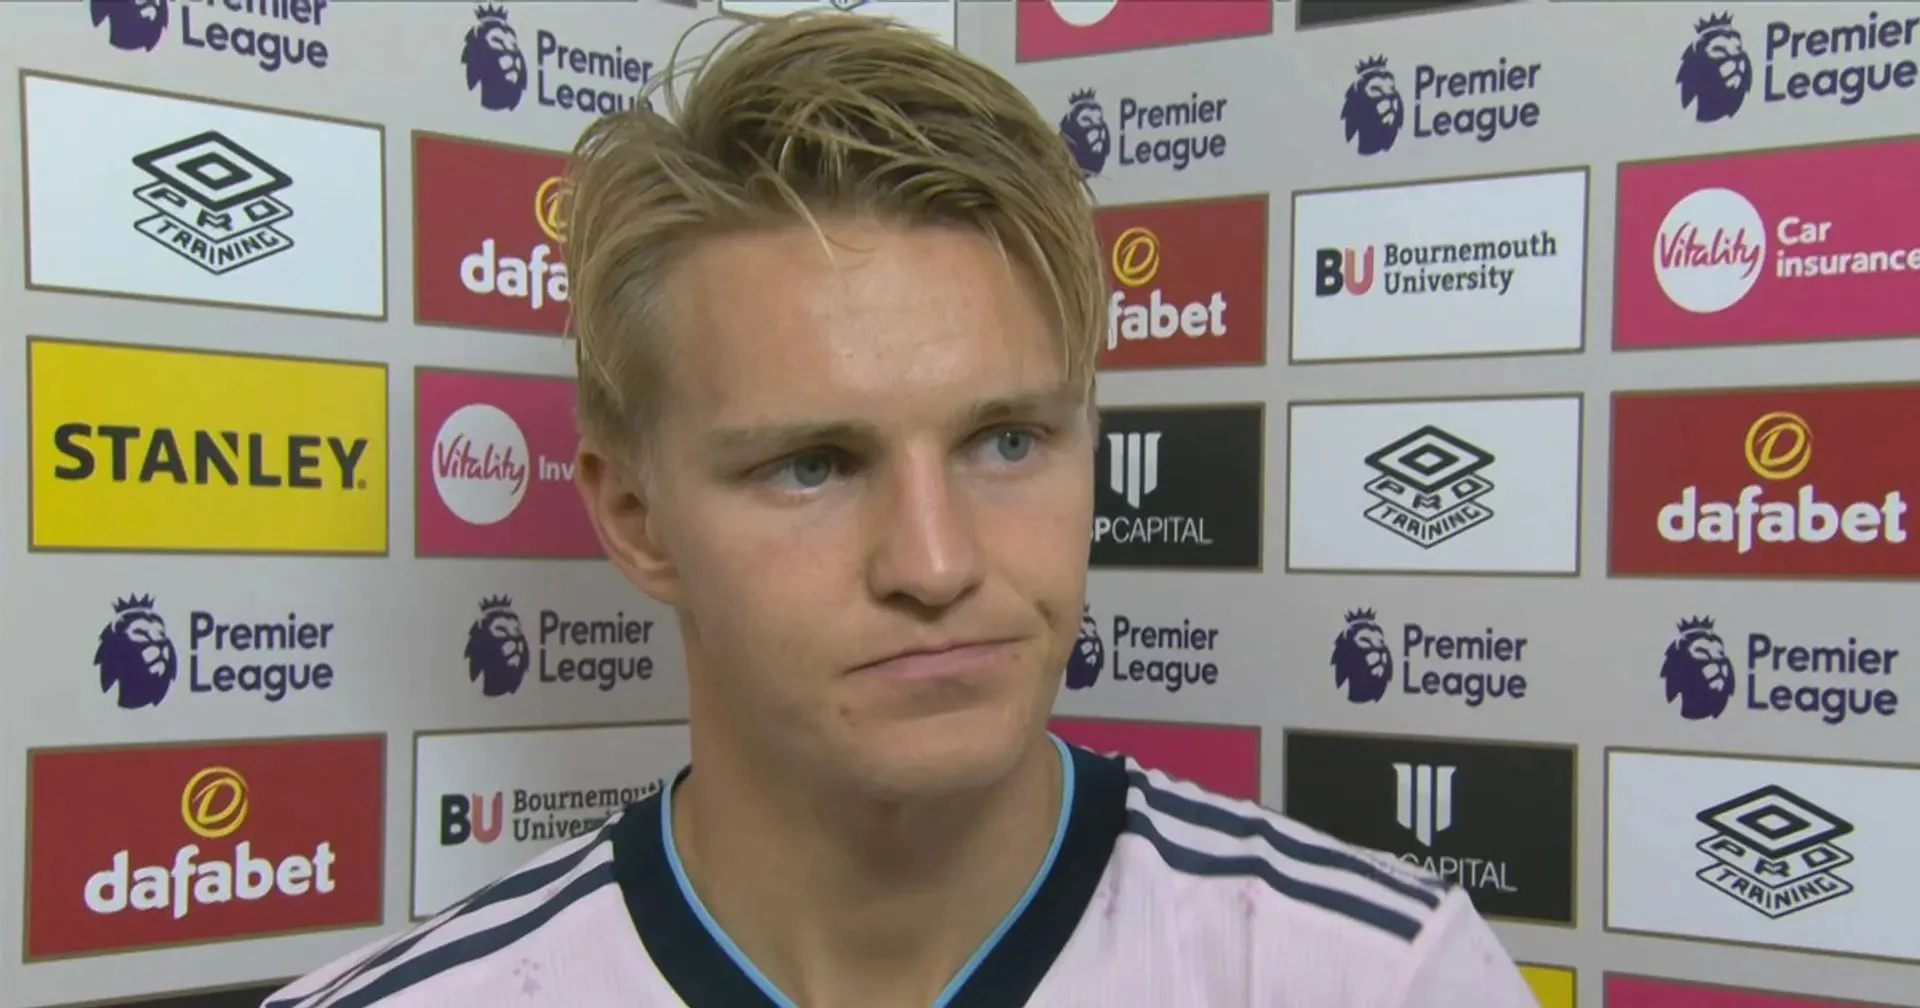 "I was attacked in the press": Odegaard on what went wrong for him at Madrid